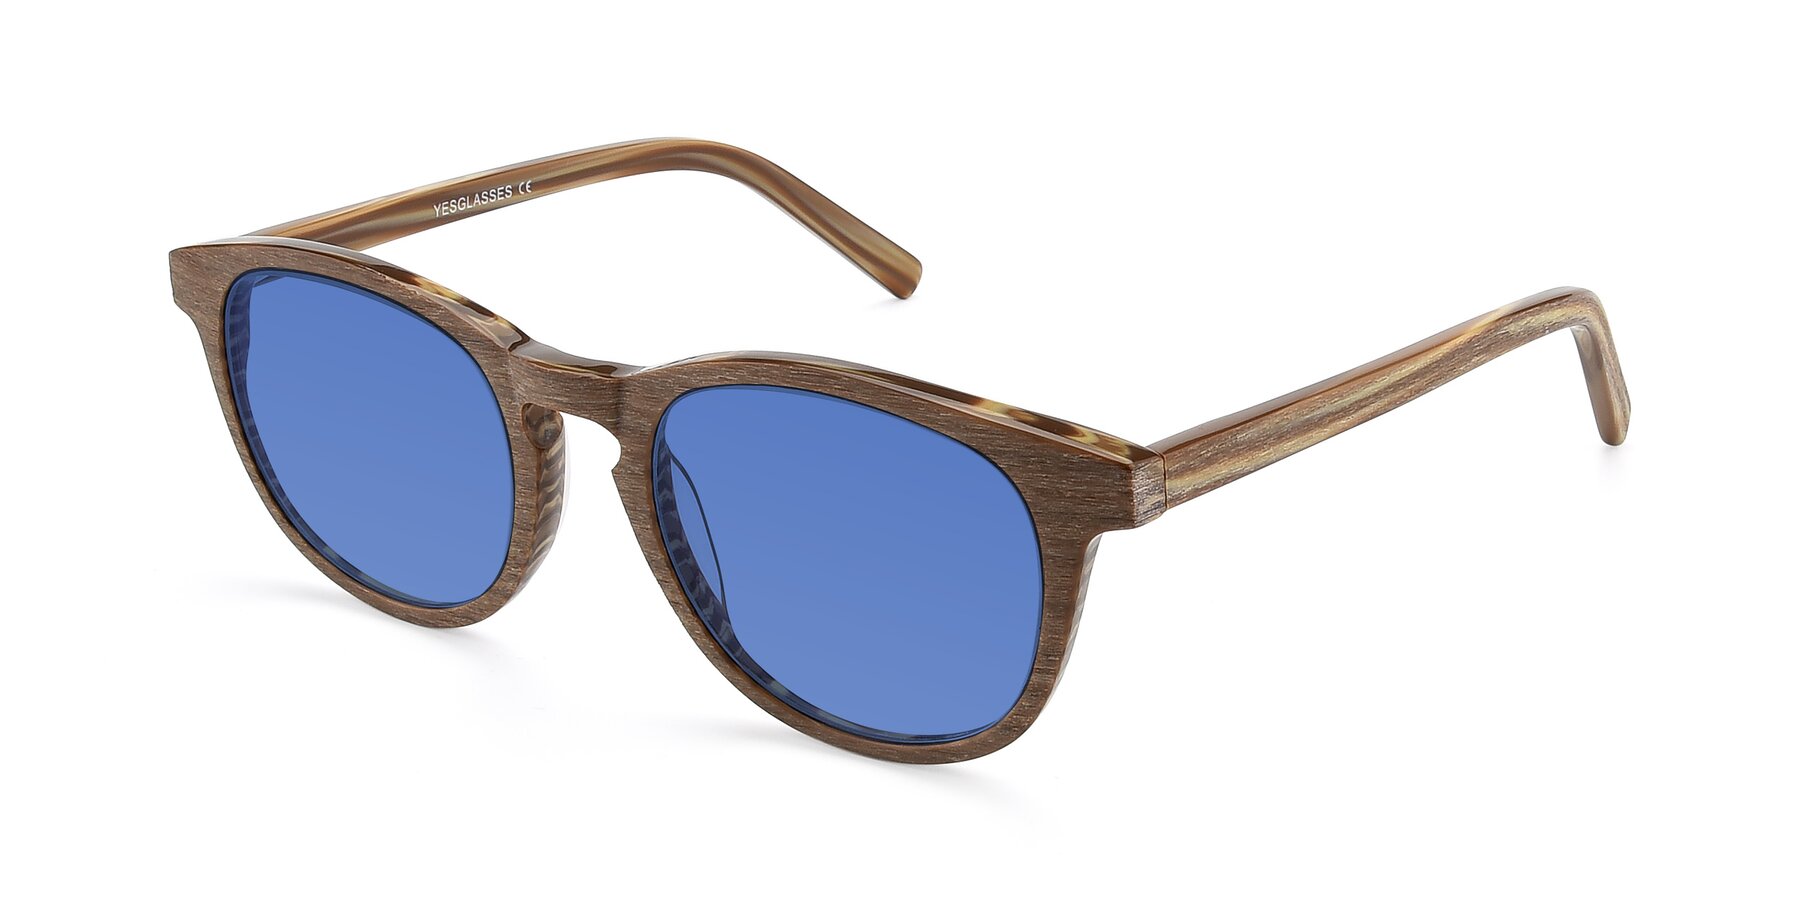 Angle of SR6044 in Brown-Wooden with Blue Tinted Lenses